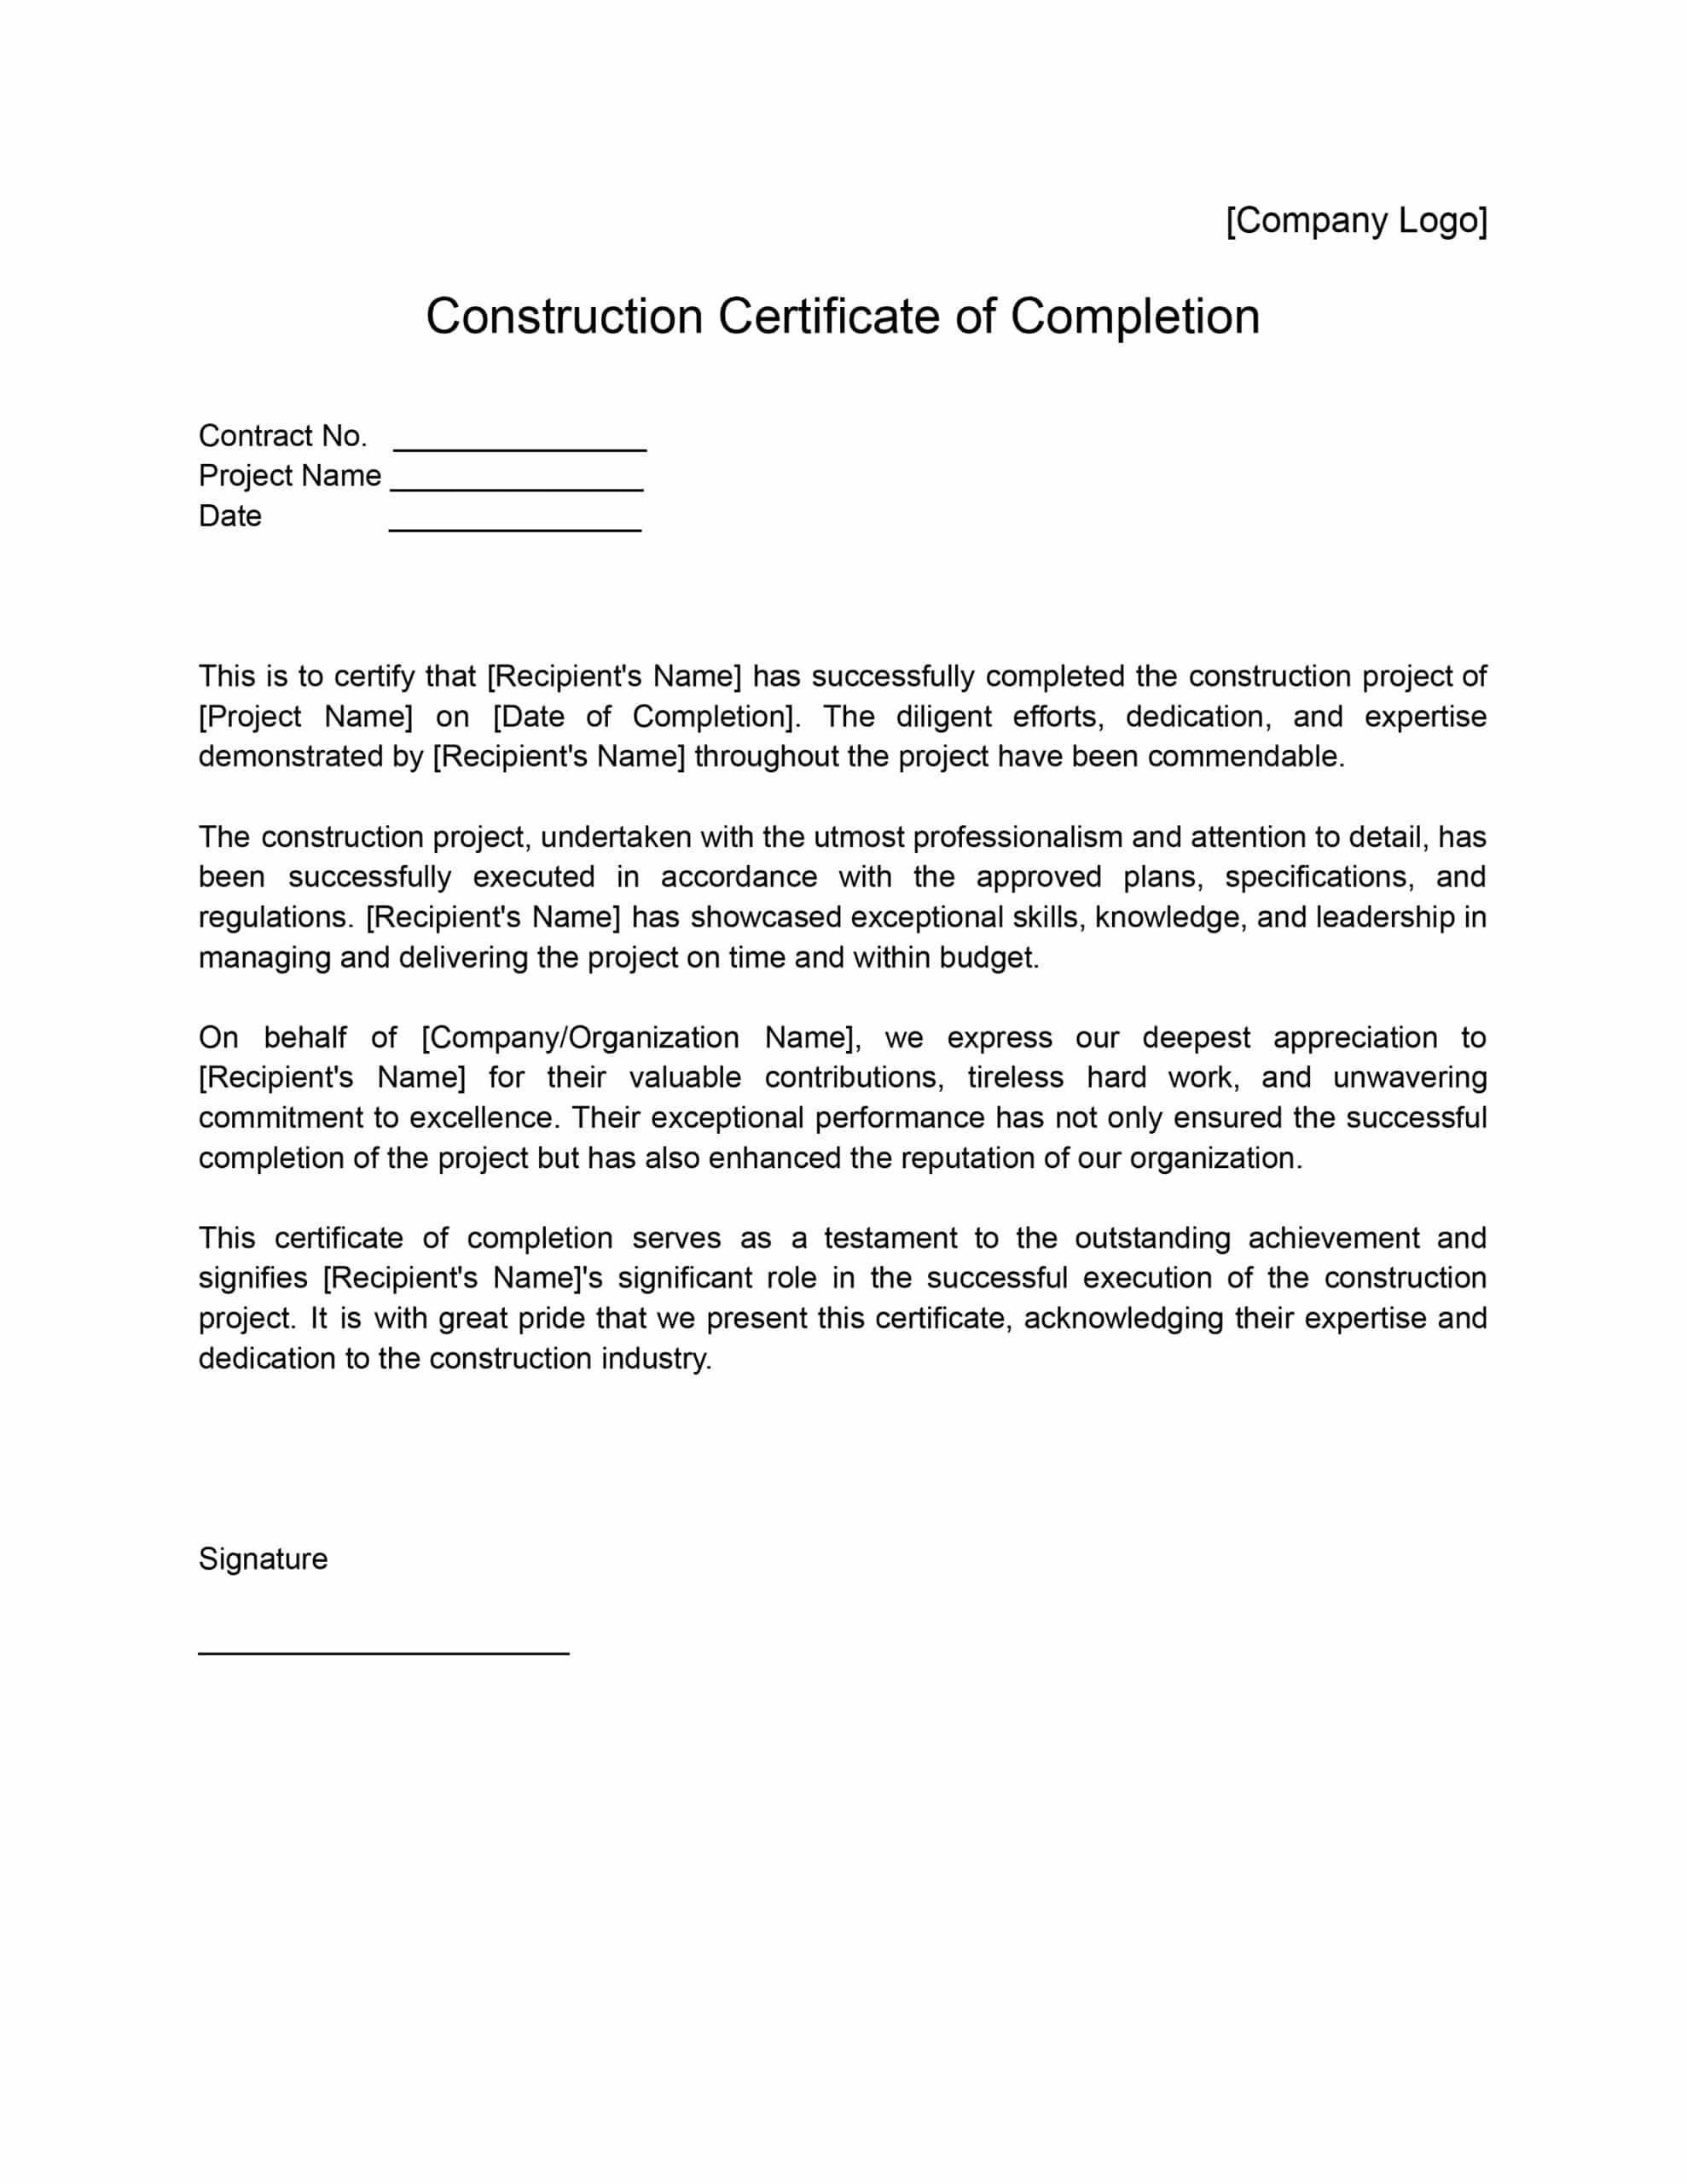 Certificate Of Completion Construction Templates 7 Te vrogue co